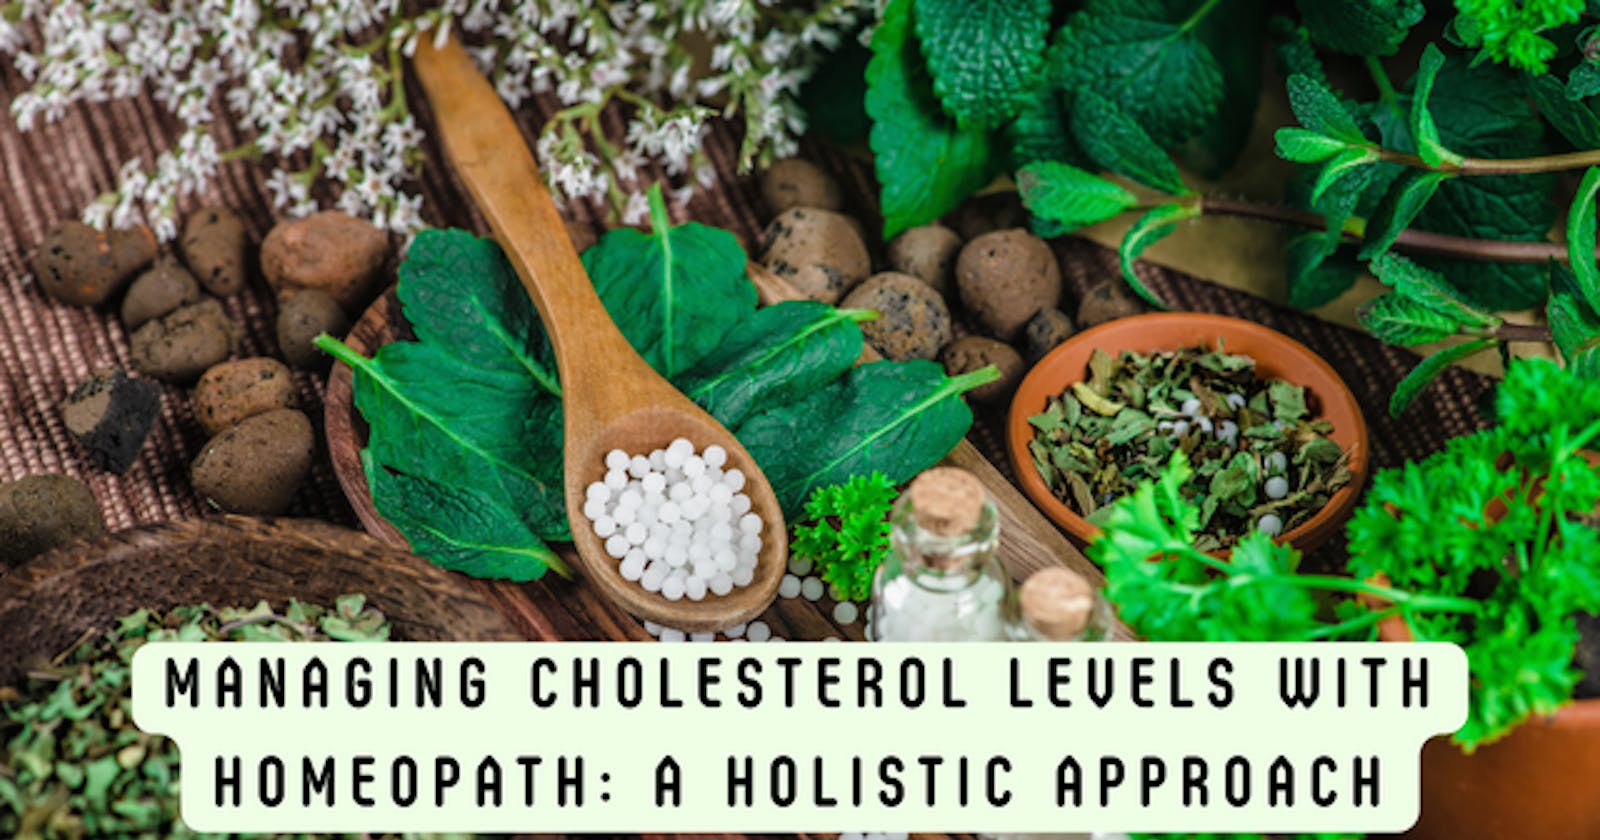 Managing Cholesterol Levels with Homeopath: A Holistic Approach